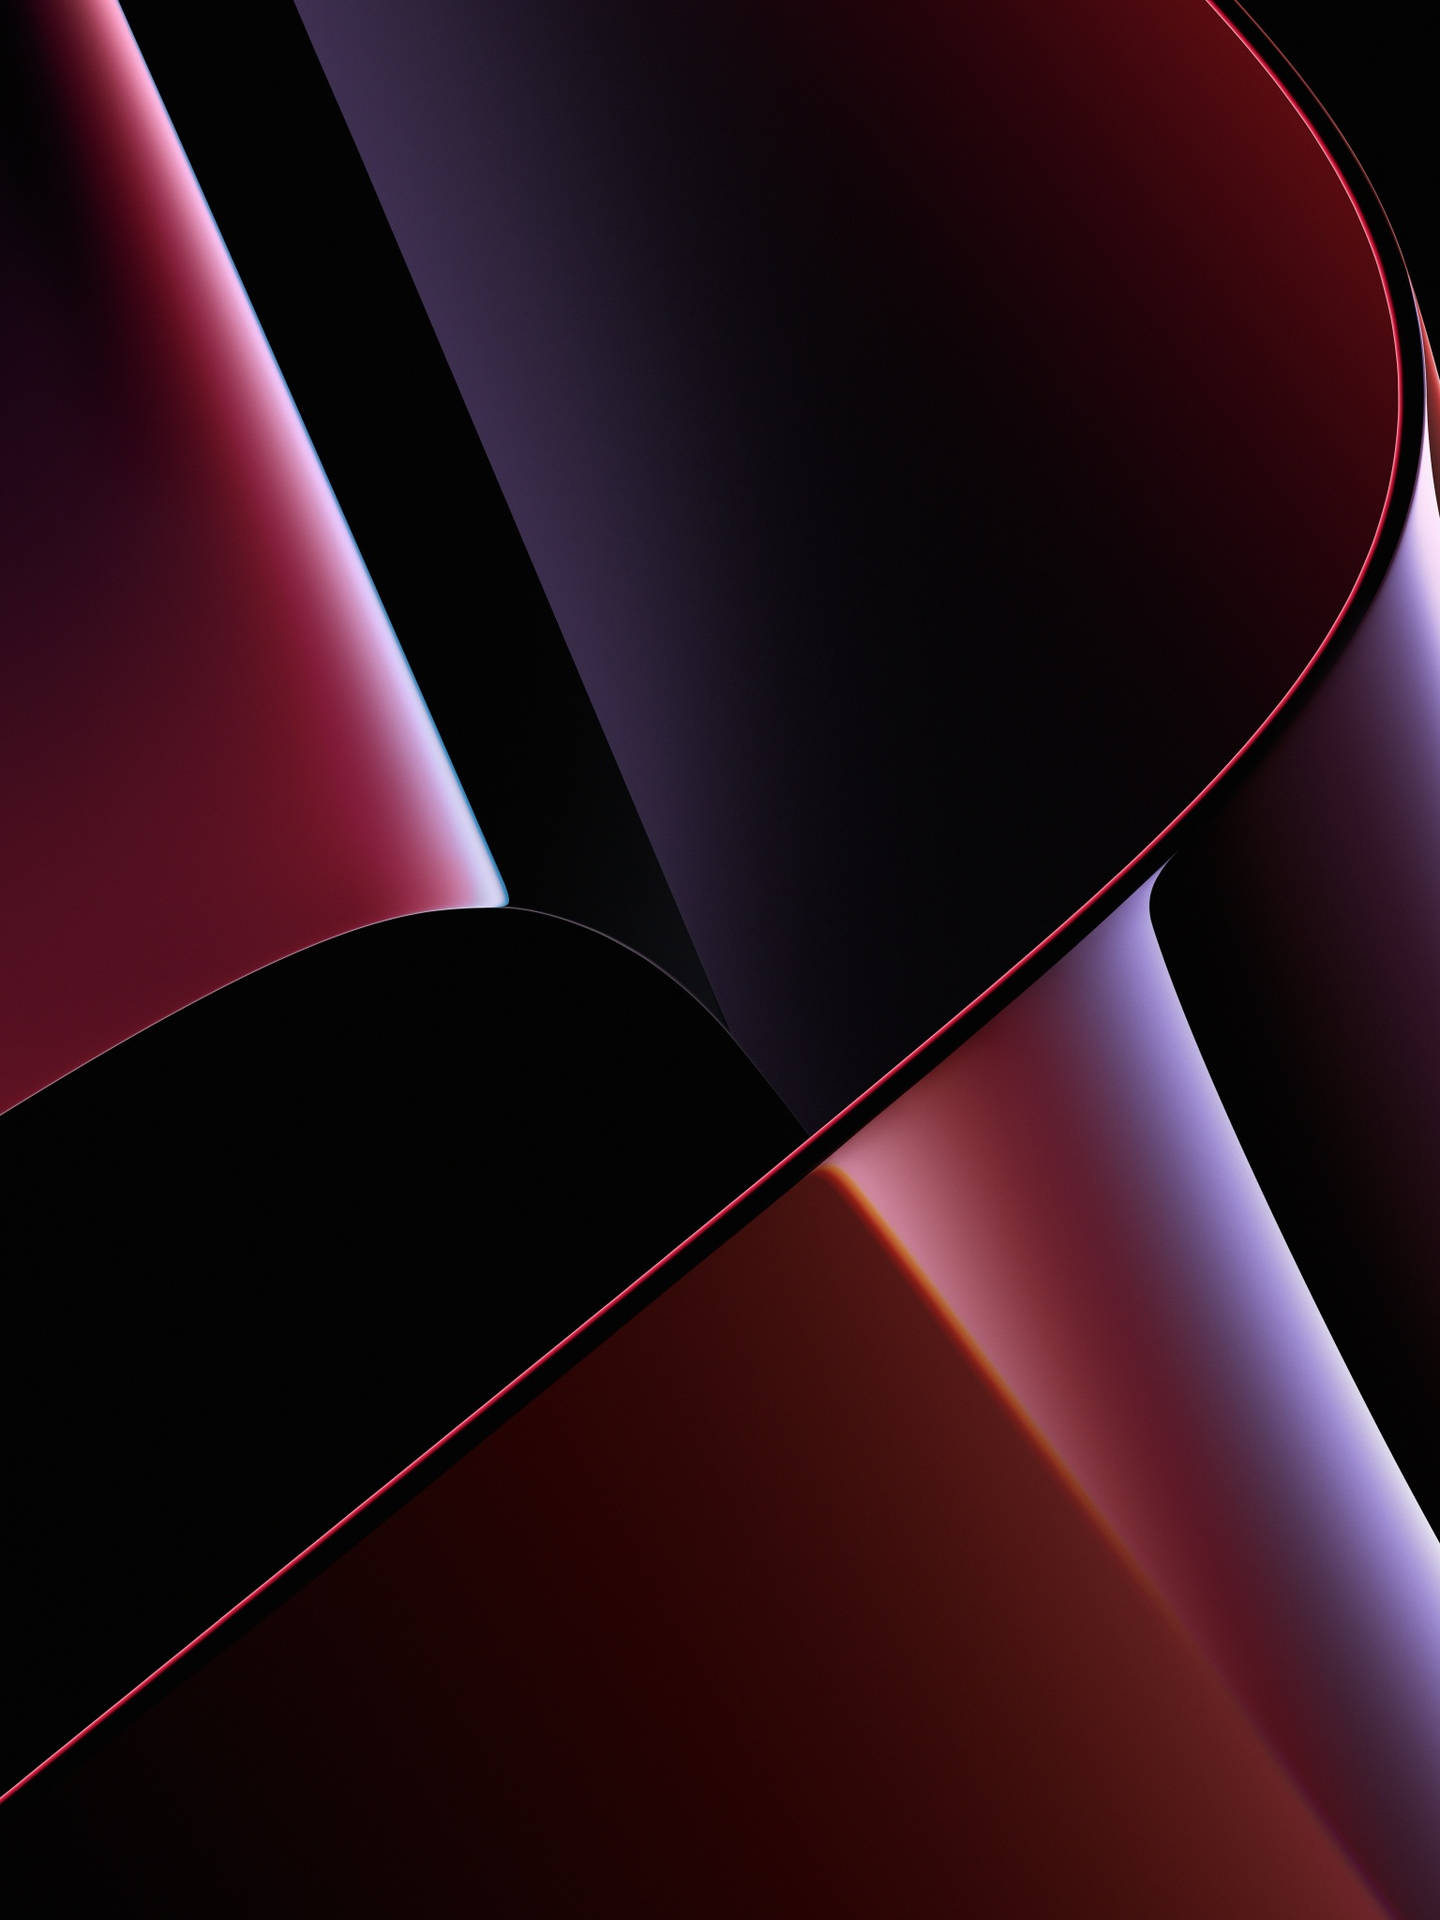 A bright and beautiful modern abstract image featuring vibrant shades of red and black. Wallpaper